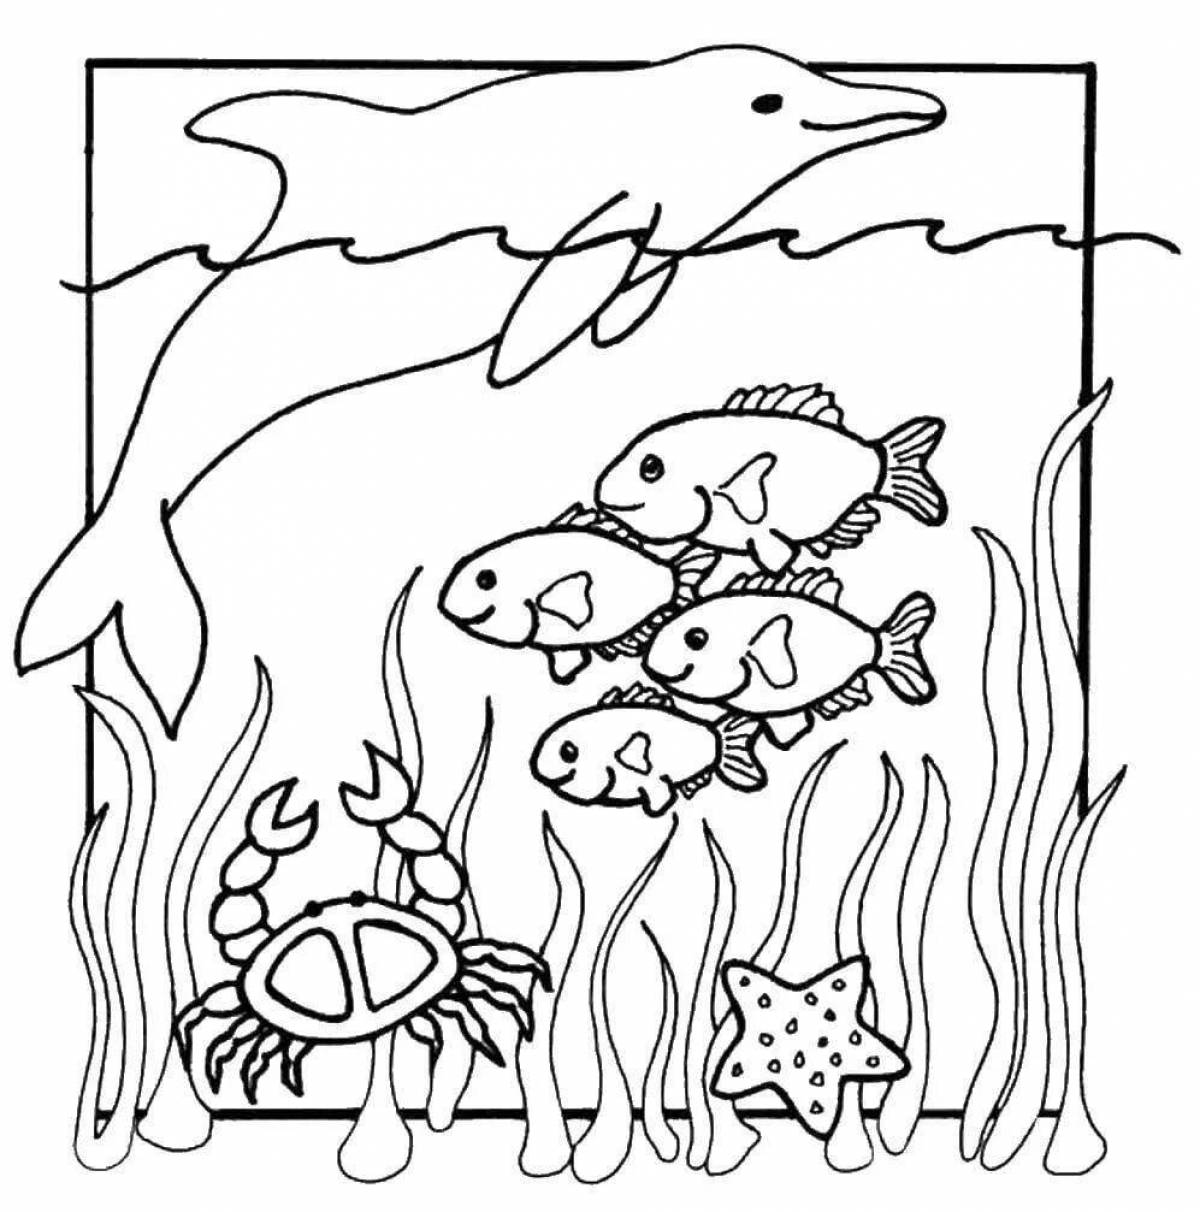 Amazing marine life coloring book for 5-6 year olds